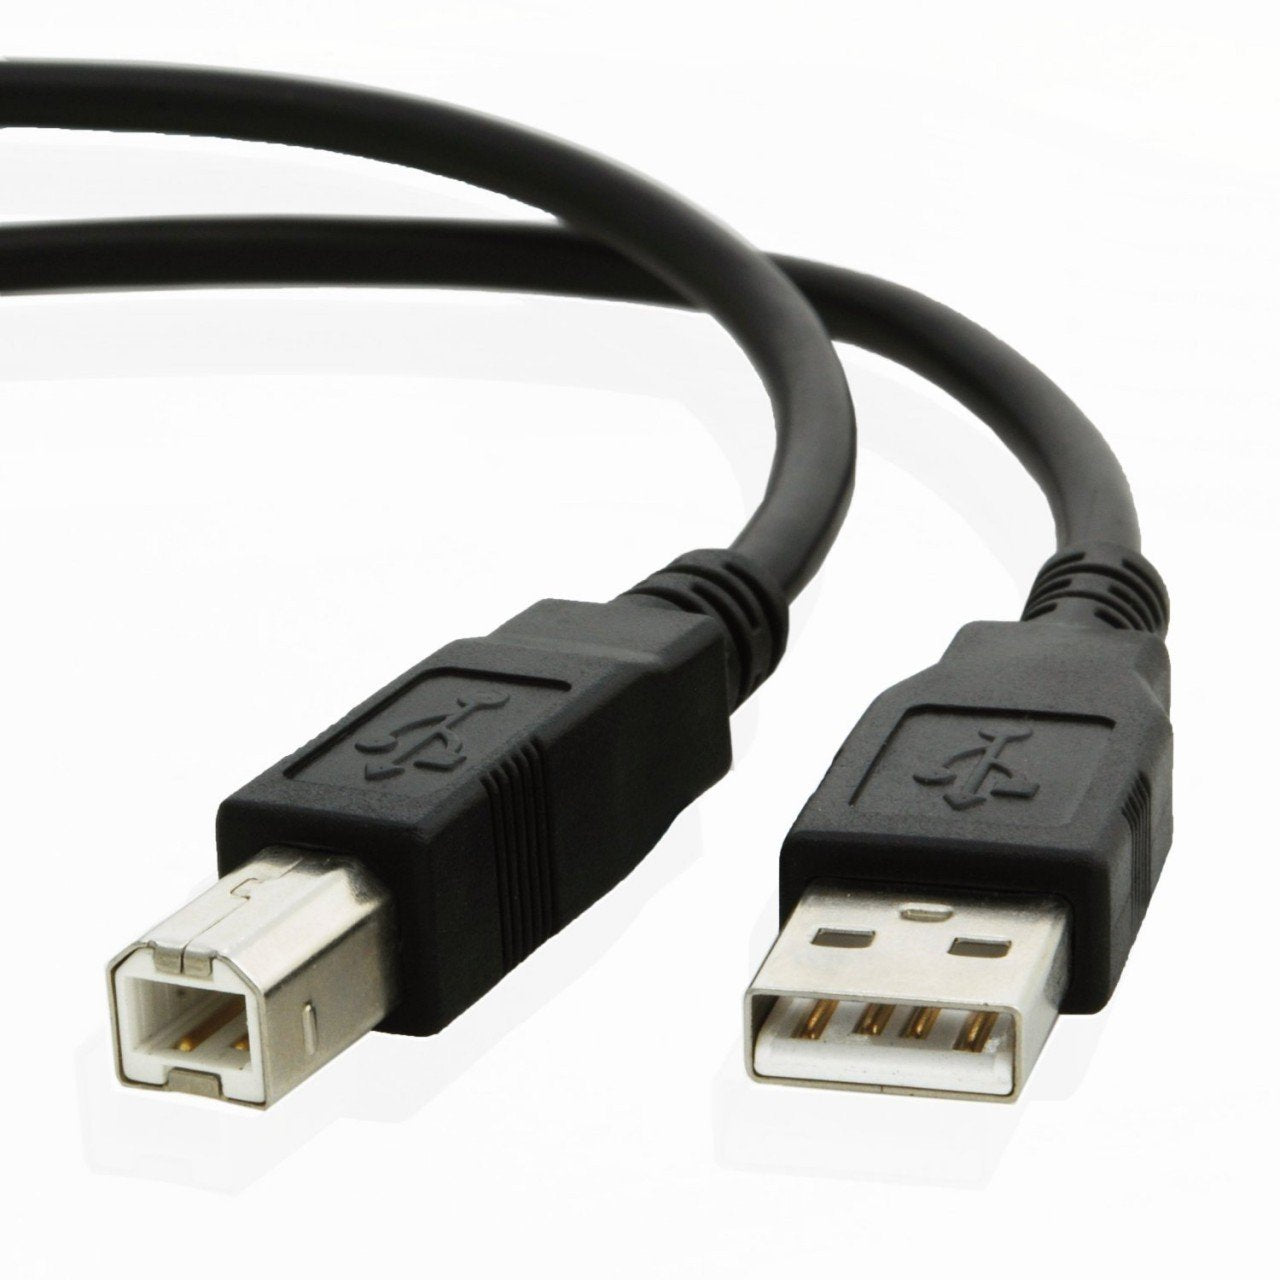 USB cable for Casio DIGITAL PIANO PX-870